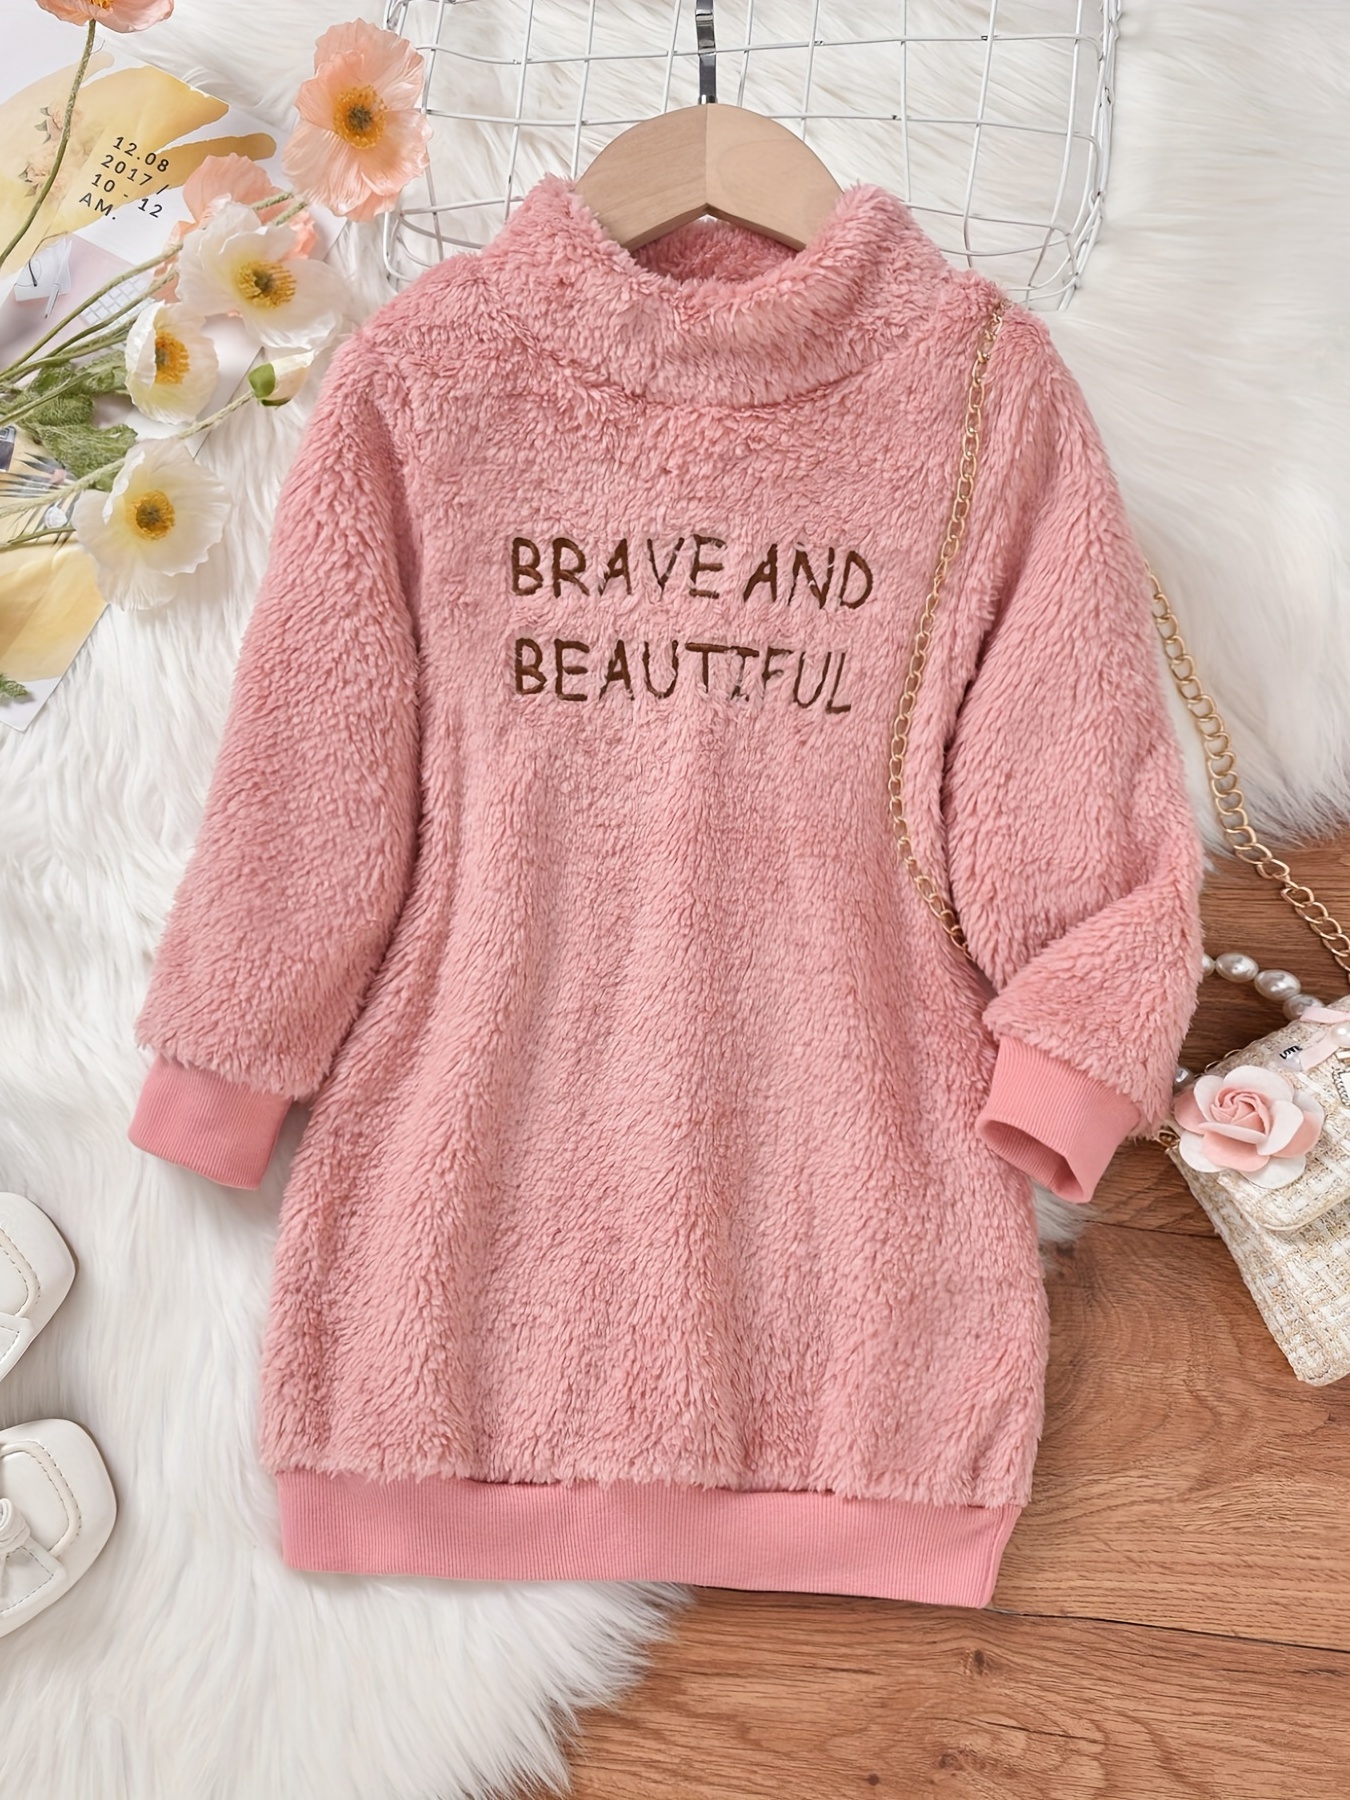 Girls Fleece Warm Dress Letter Embroidered High Neck Long Sleeves Dress For  Winter Kids Clothes, High-quality & Affordable